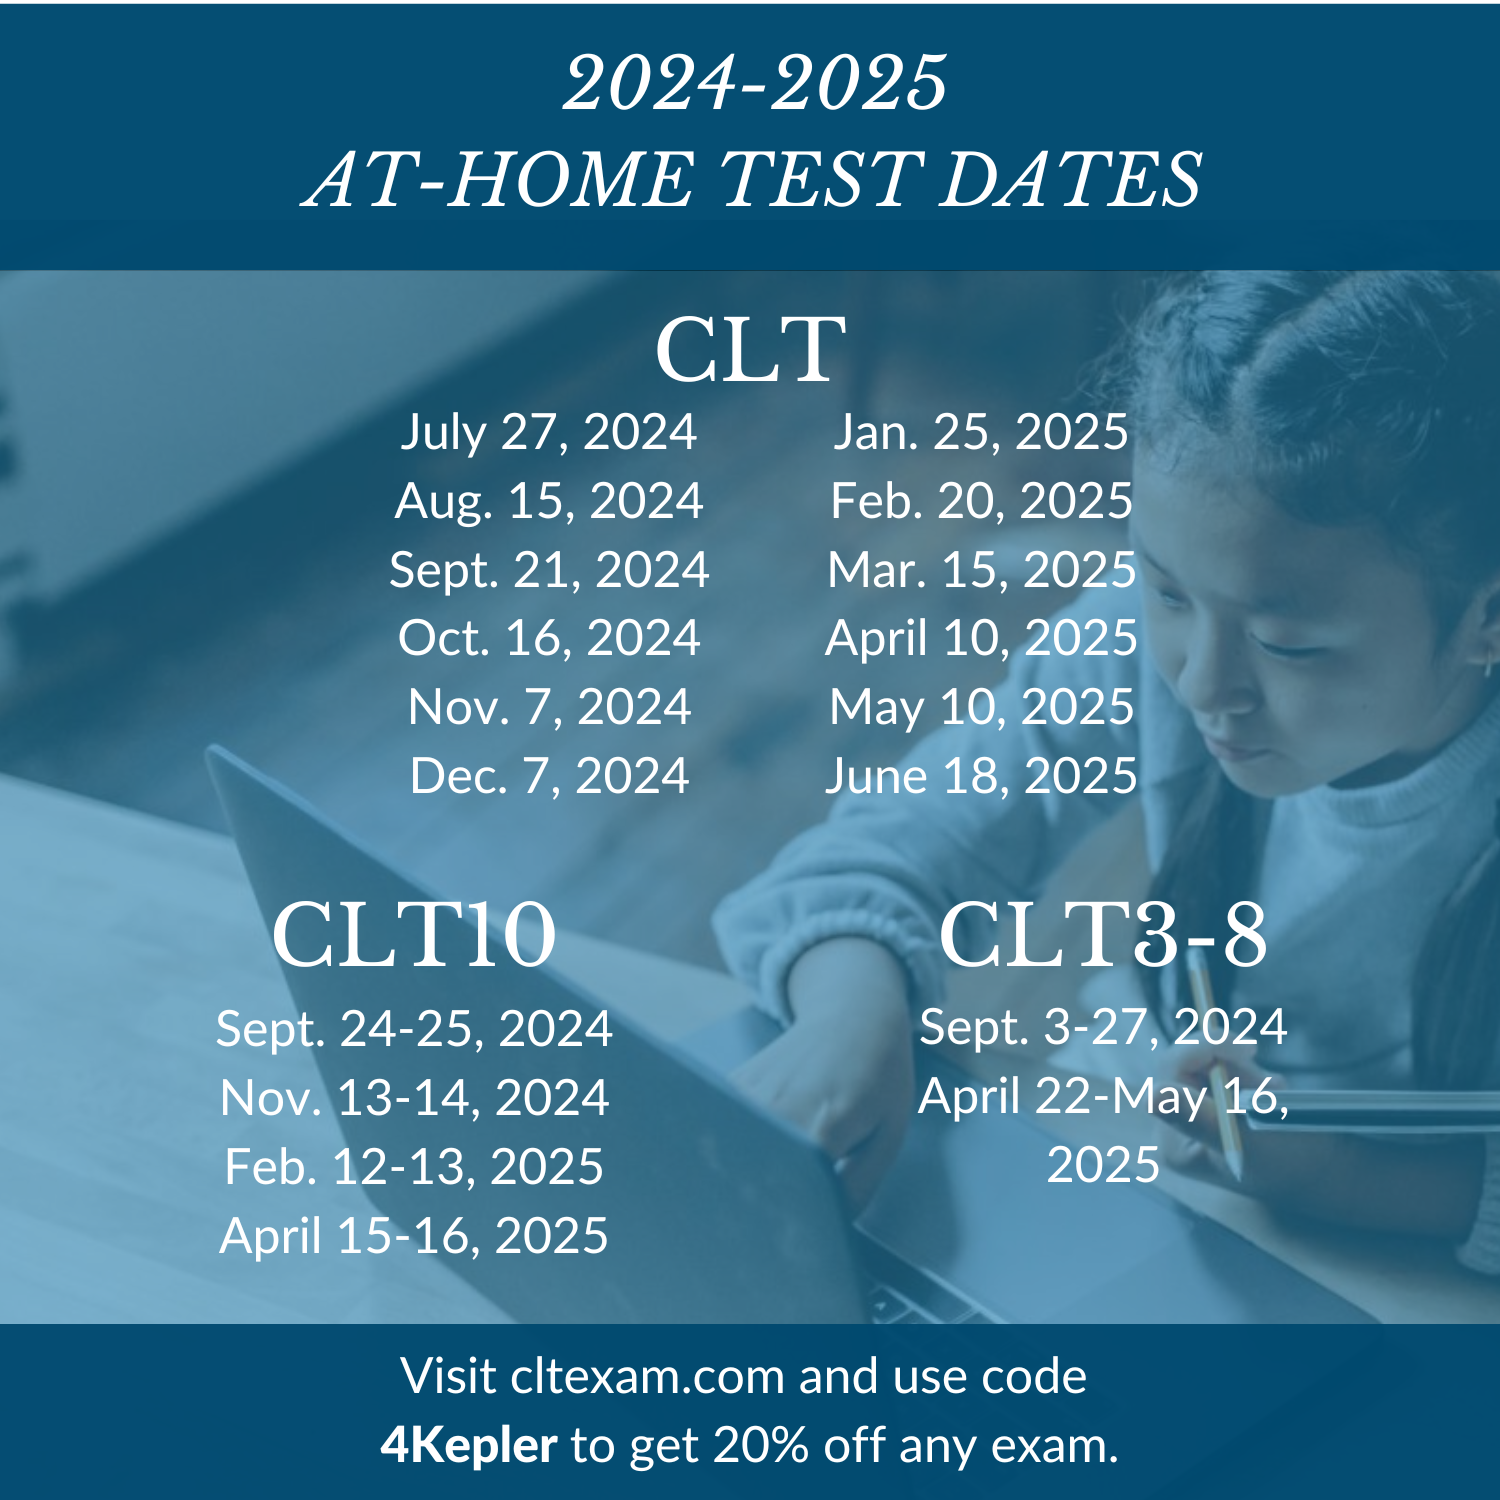 updated test dates graphic for the 2024-2025 school year